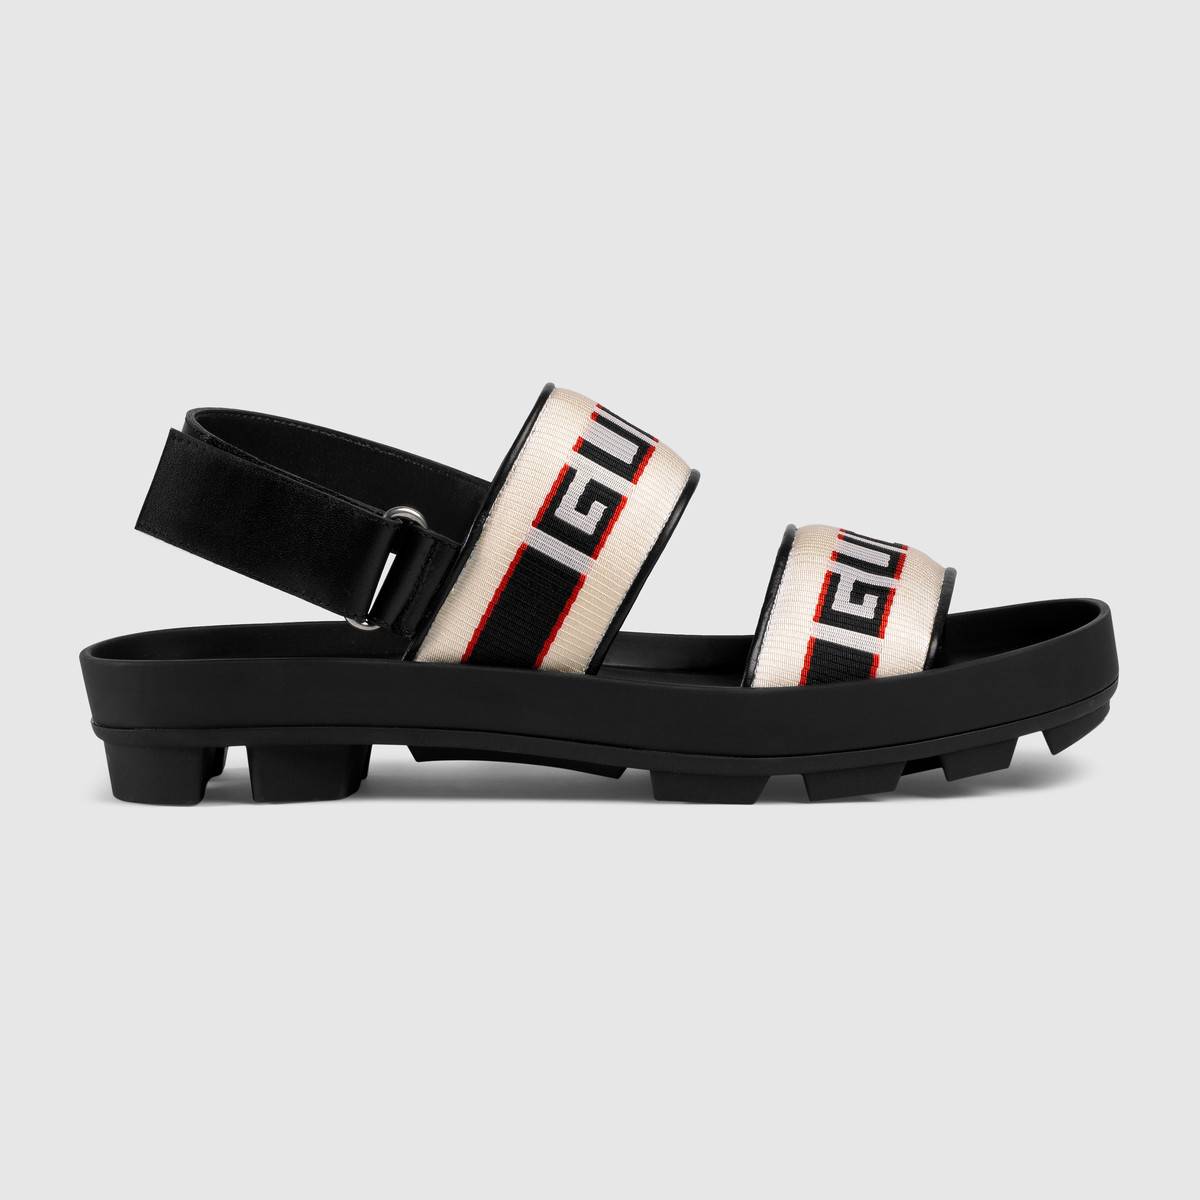 Gucci Drops New Sports Influenced Sandals for Summer